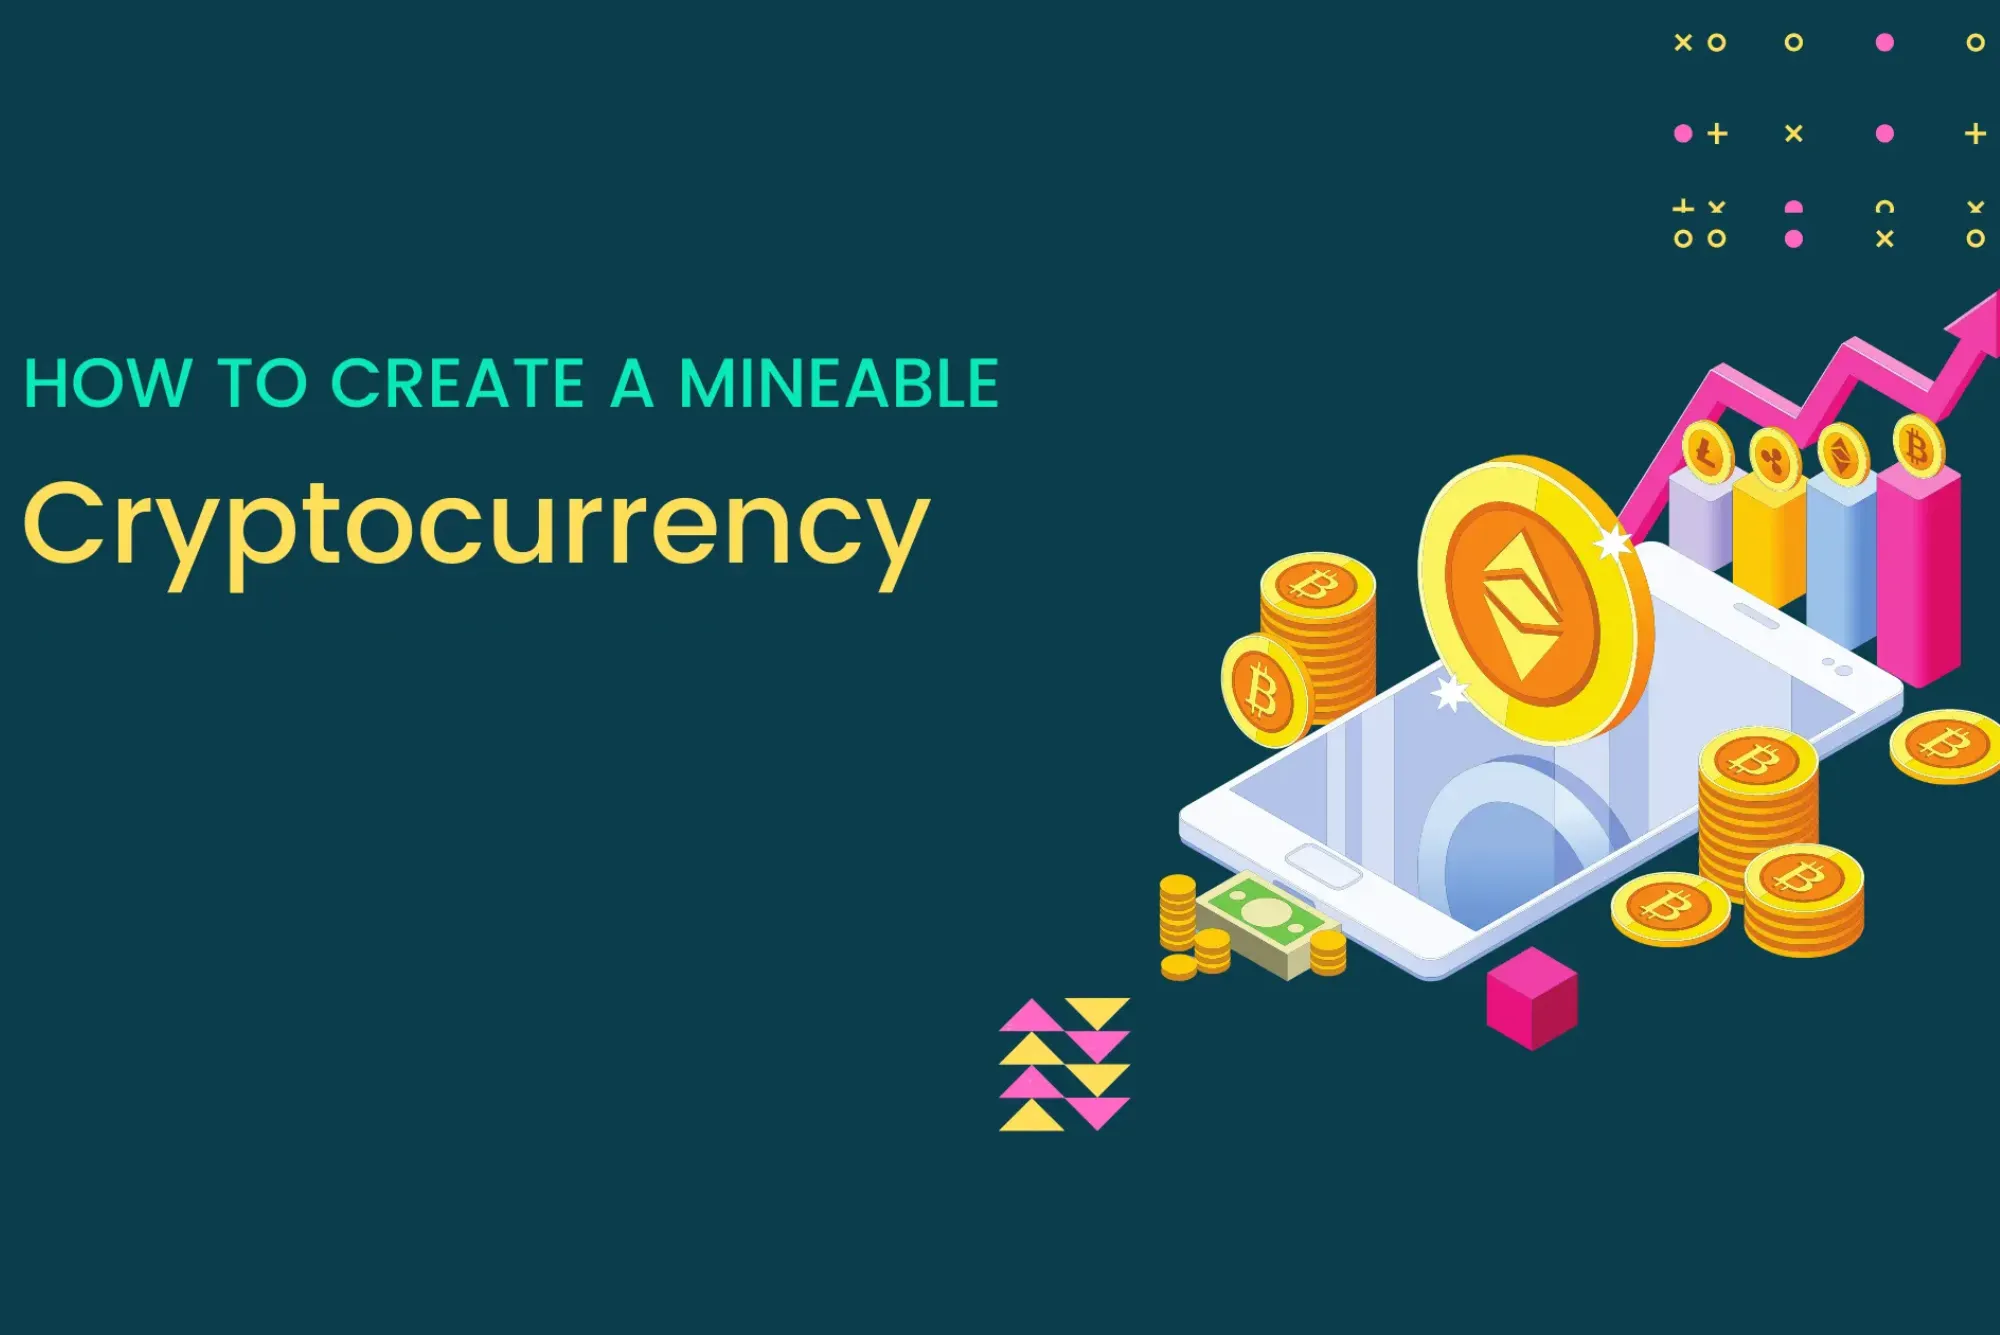 How to Create a Mineable Cryptocurrency